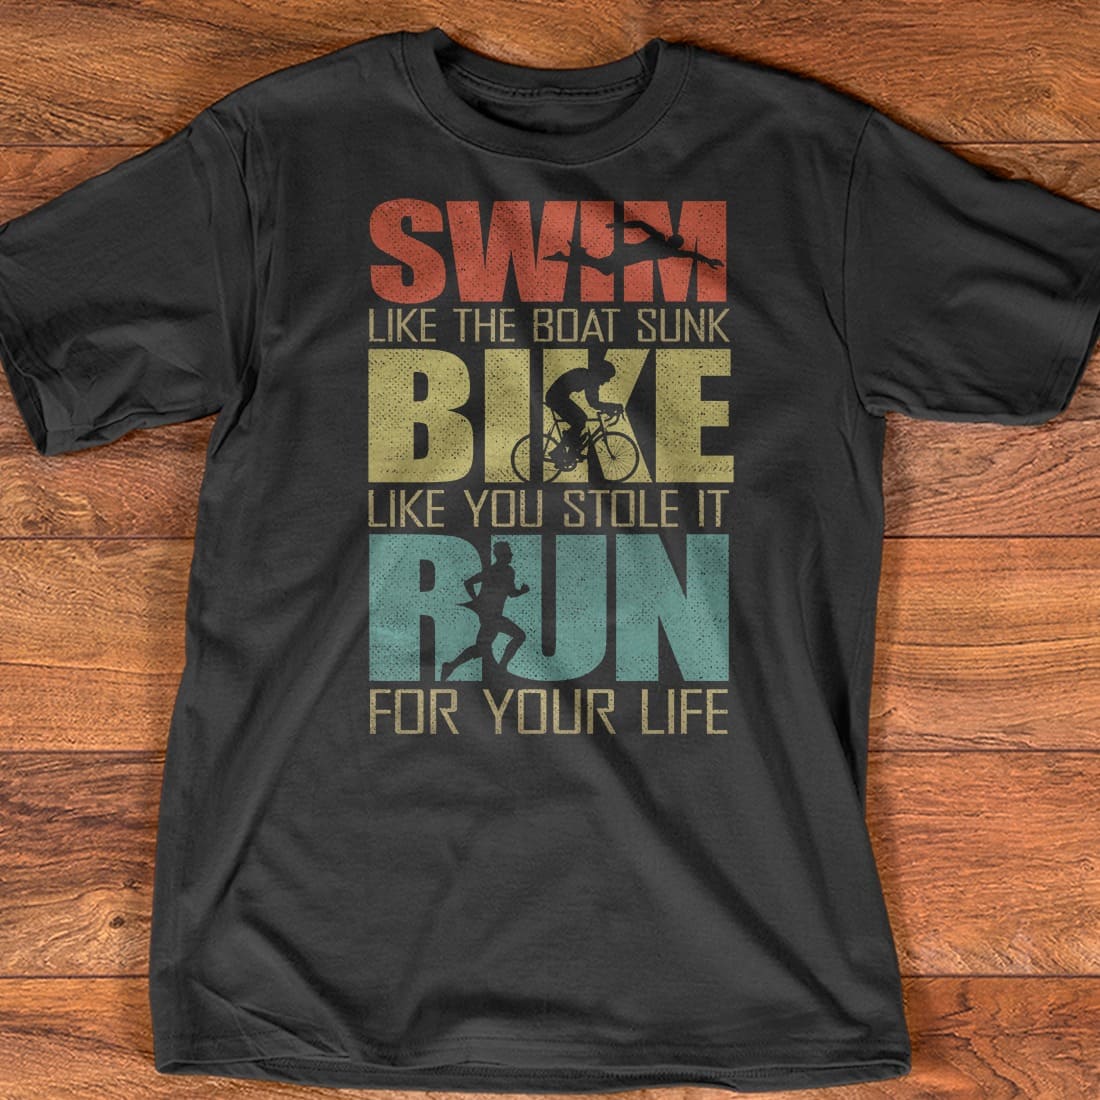 Swim like the boat sunk, bike like you stole it, run for your life - Gift for sporty people